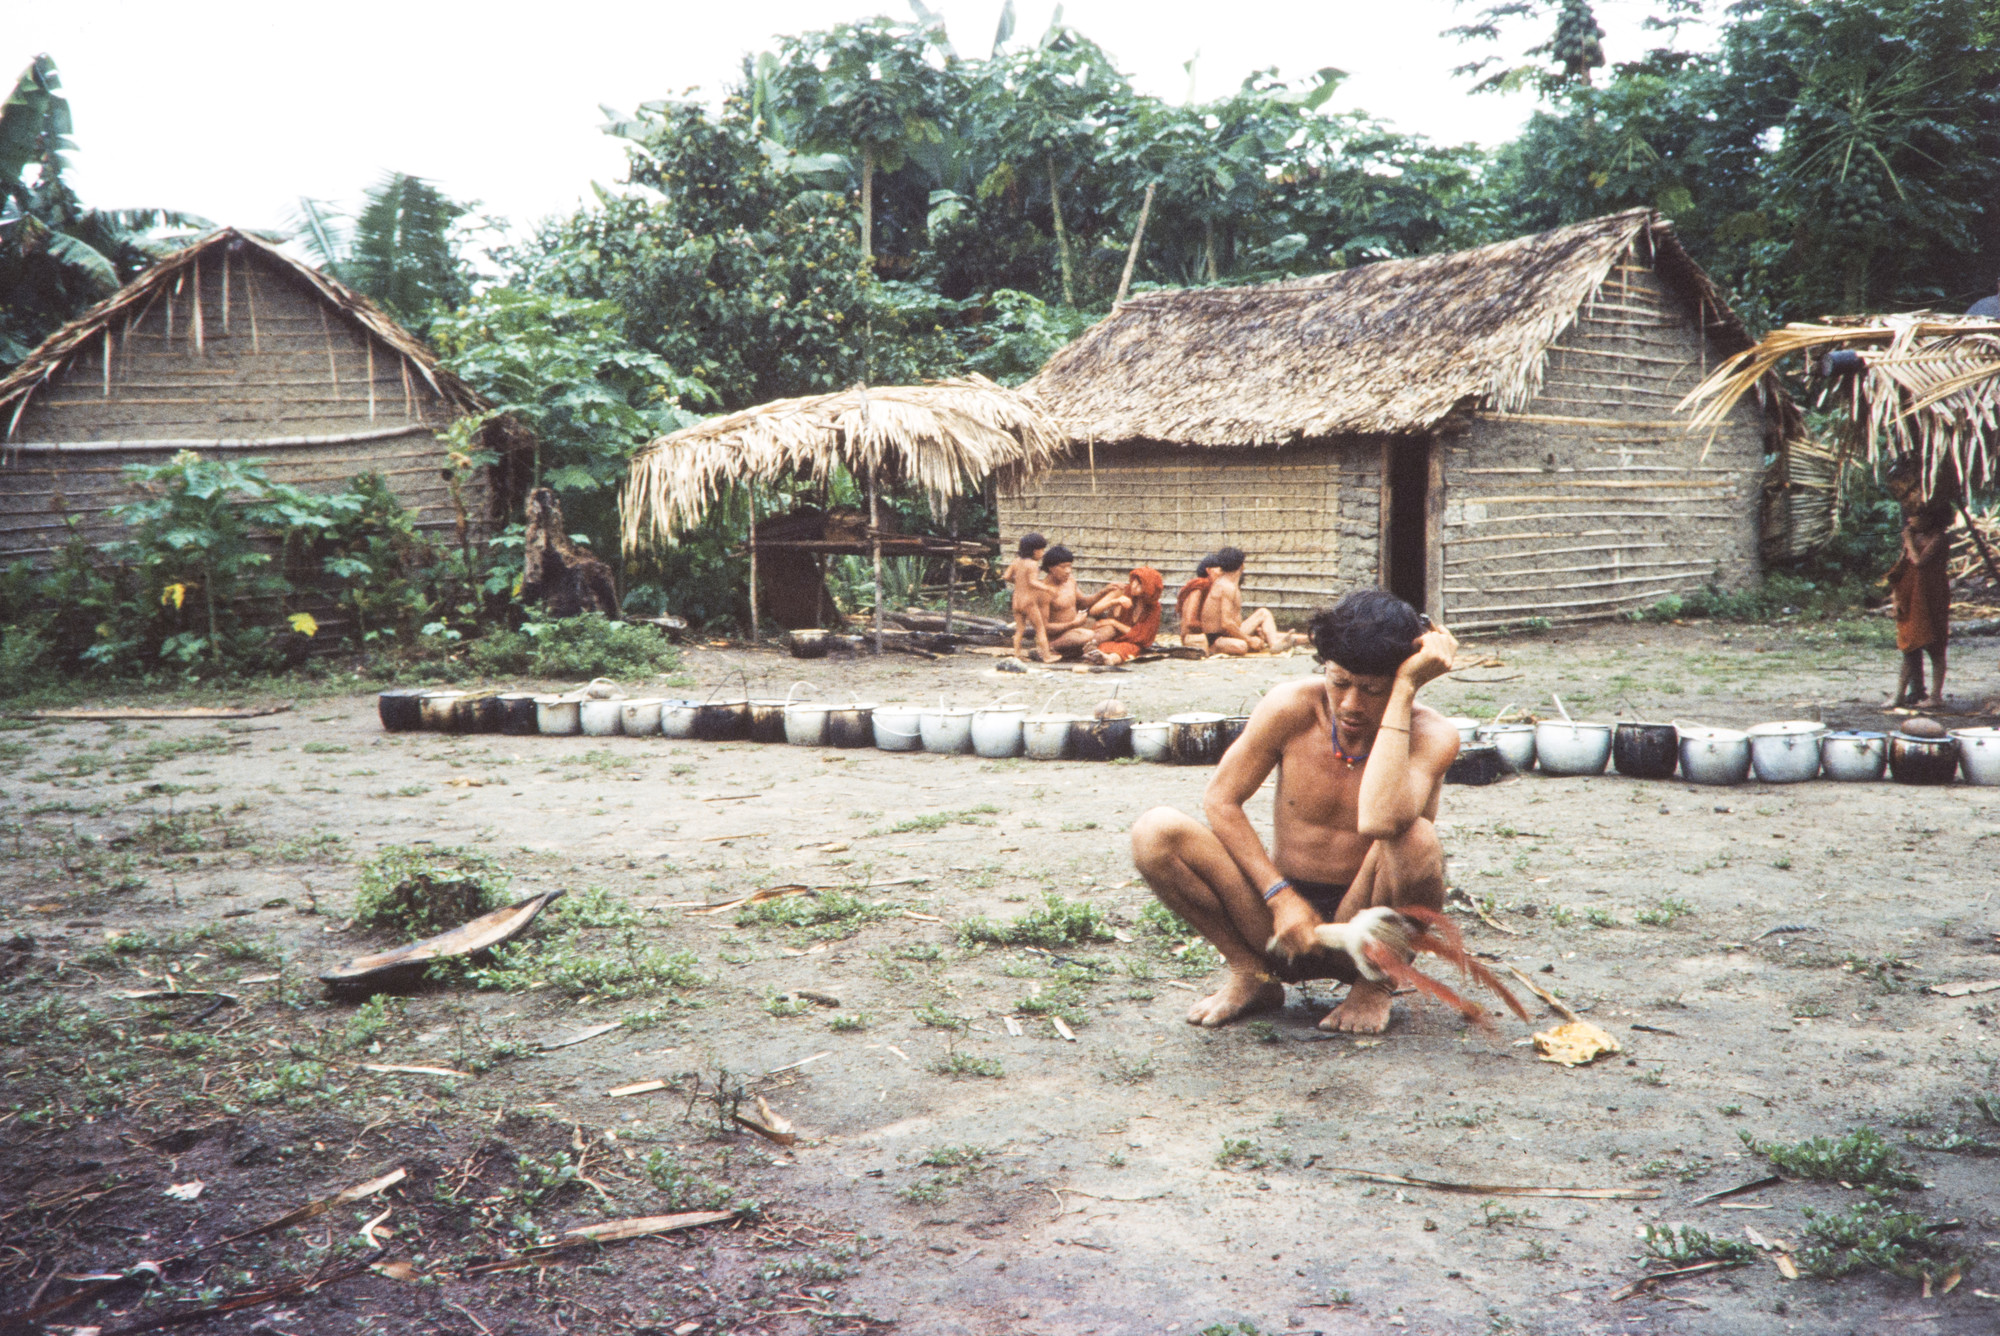 Araweté with the aray, a rattle used by adult men for small cures, nocturnal chants and shamanic rituals usually accompanied by the "tobacco eaters" cigar, Araweté Indigenous Land/Igarapé Ipixuna, Pará @Eduardo Viveiros de Castro